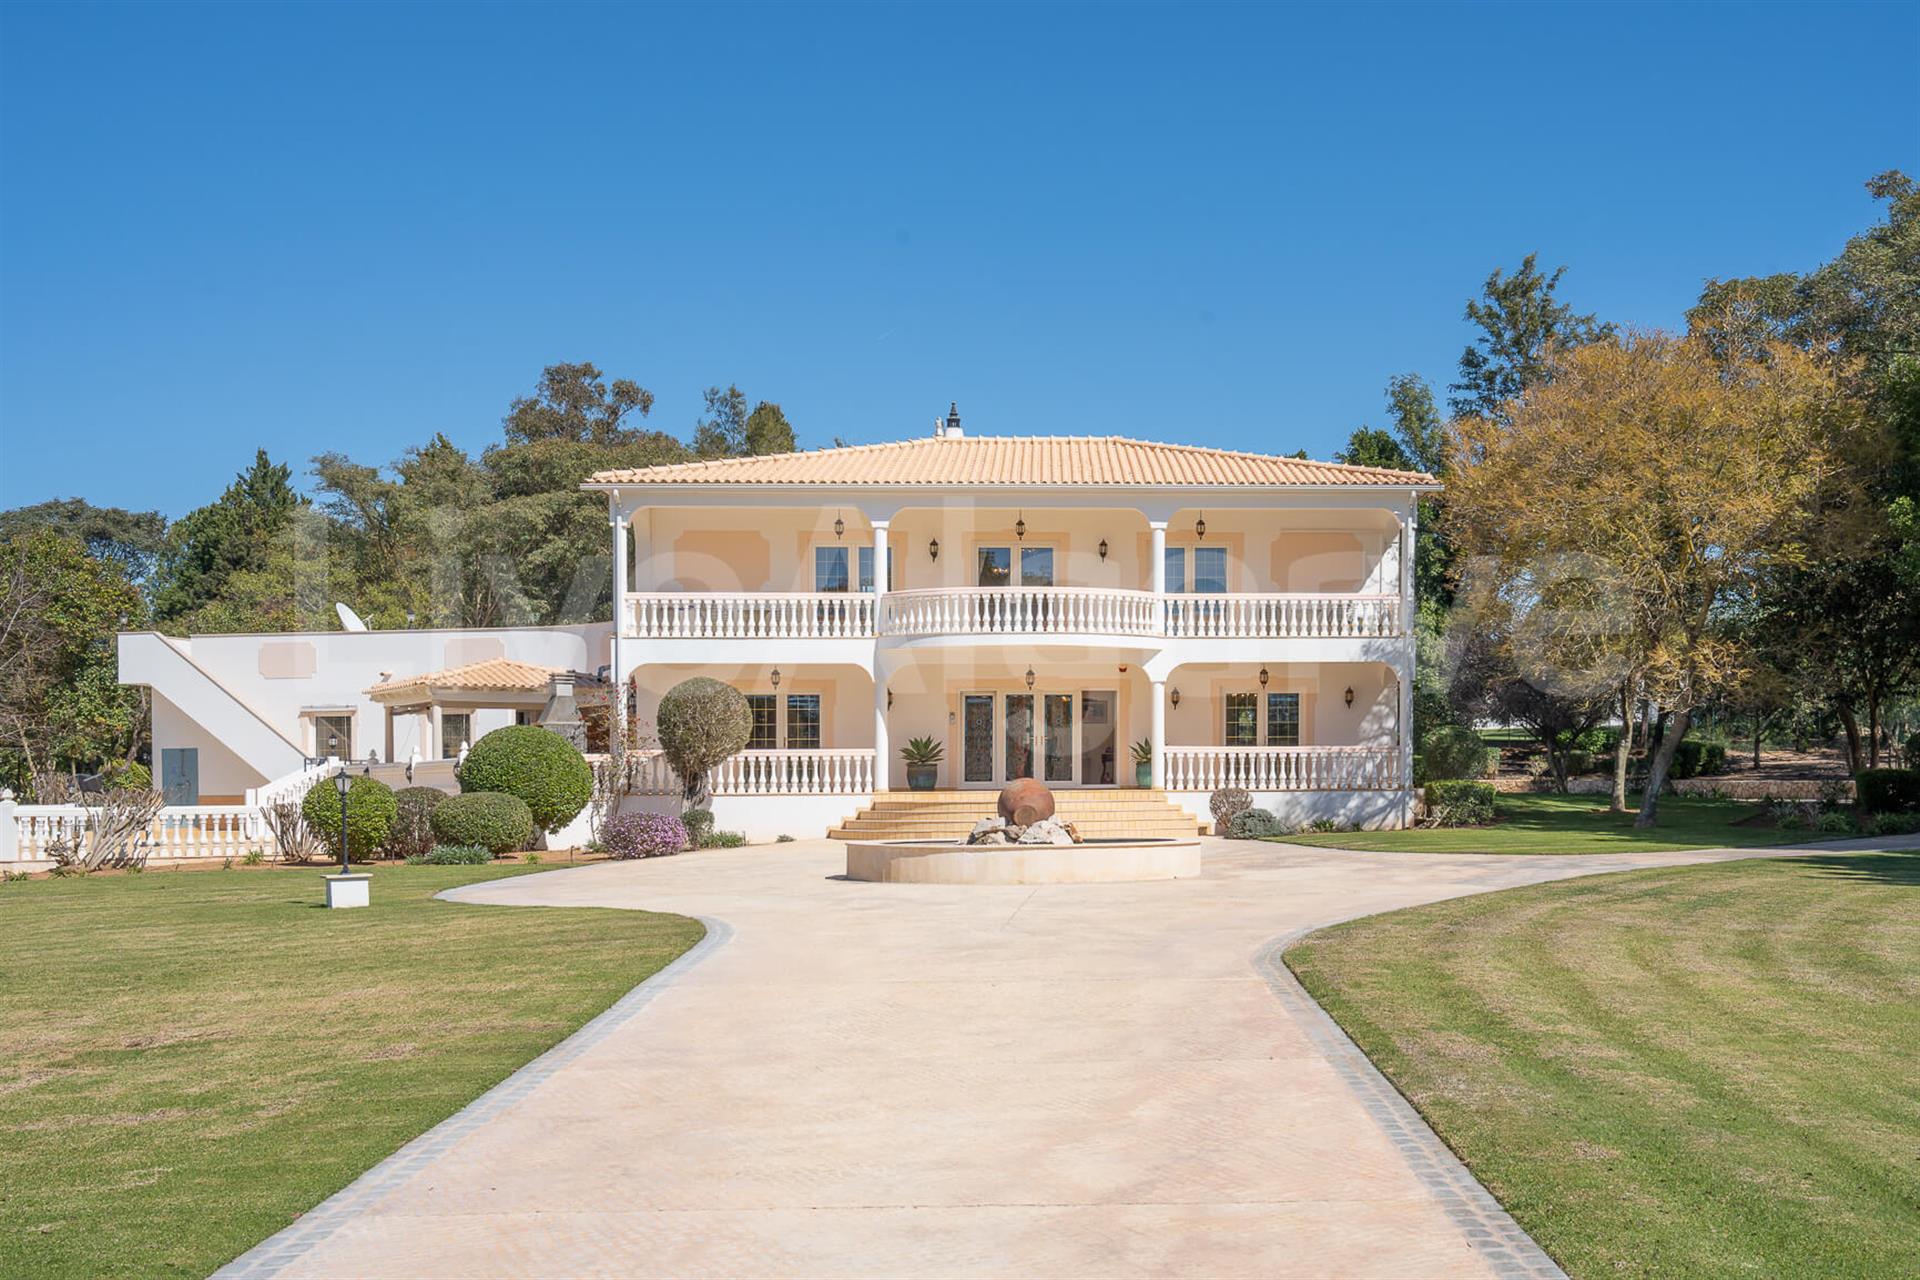 Exclusive | Grand T4 Villa In Tranquil Secluded Setting At Estômbar For Sale - Lagoa